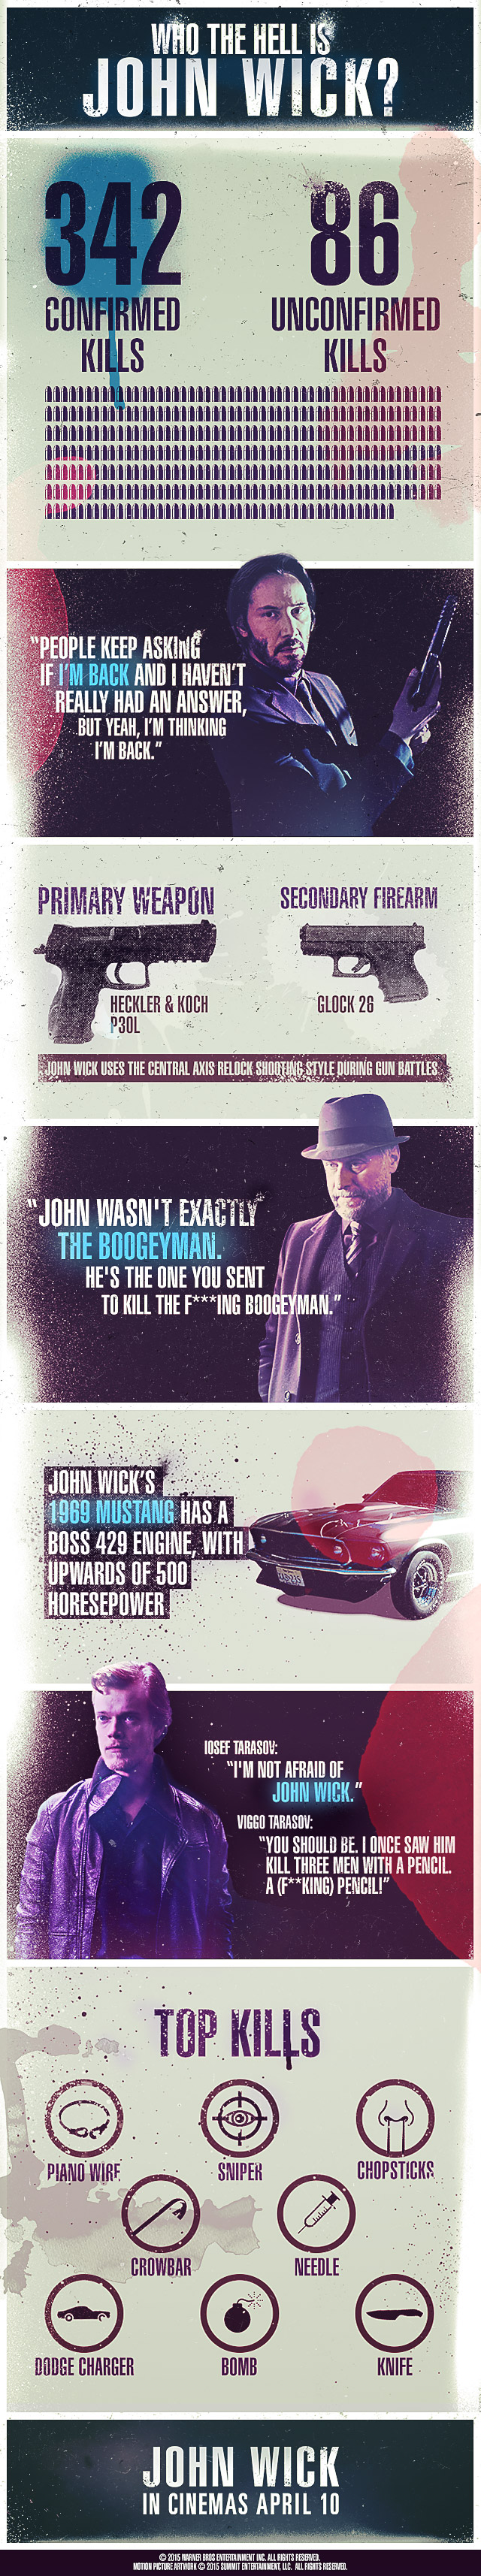 Who the heck is John Wick - infographic